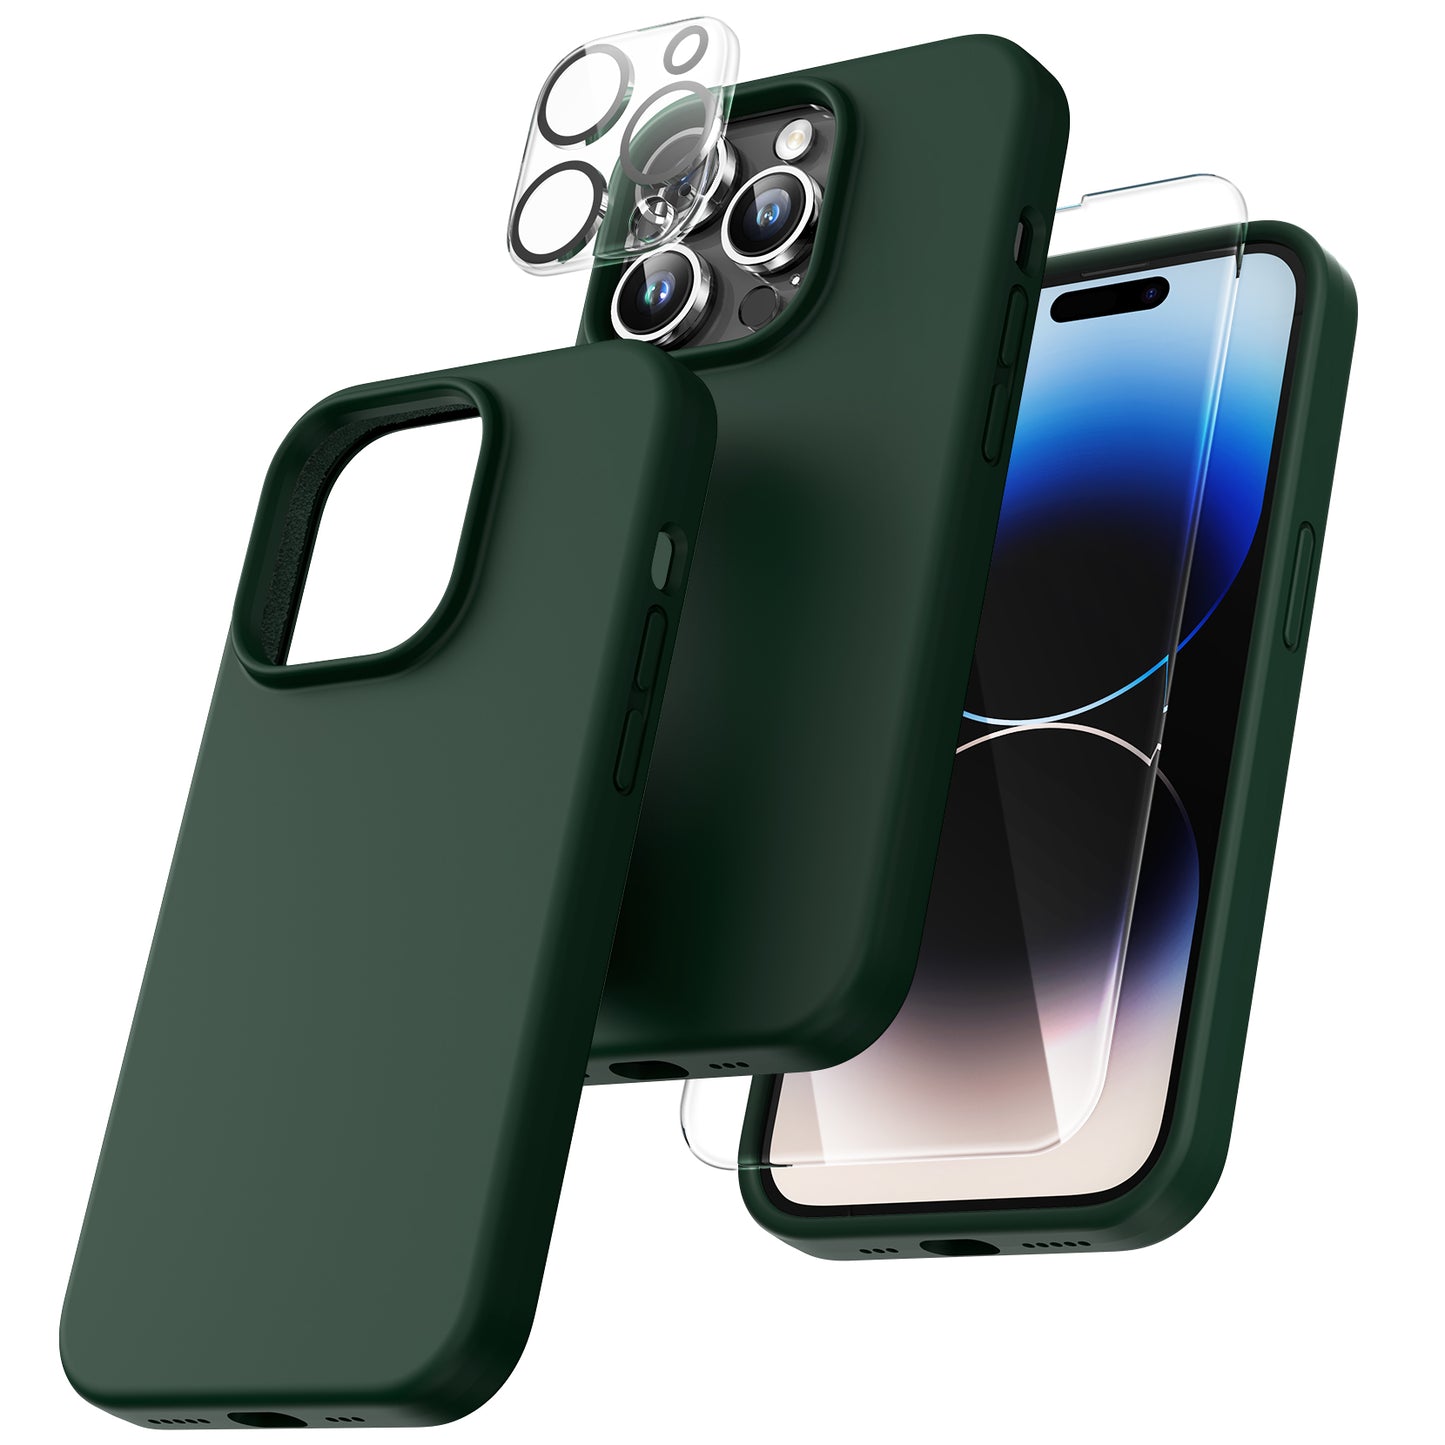 TOCOL [5 in 1] for iPhone 14 Pro Max Case, 2 Screen Protector + 2 Camera Lens Protector, Slim Liquid Silicone Phone Case iPhone 14 Pro Max 6.7 Inch, [Anti-Scratch] [Drop Protection], Alpine Green